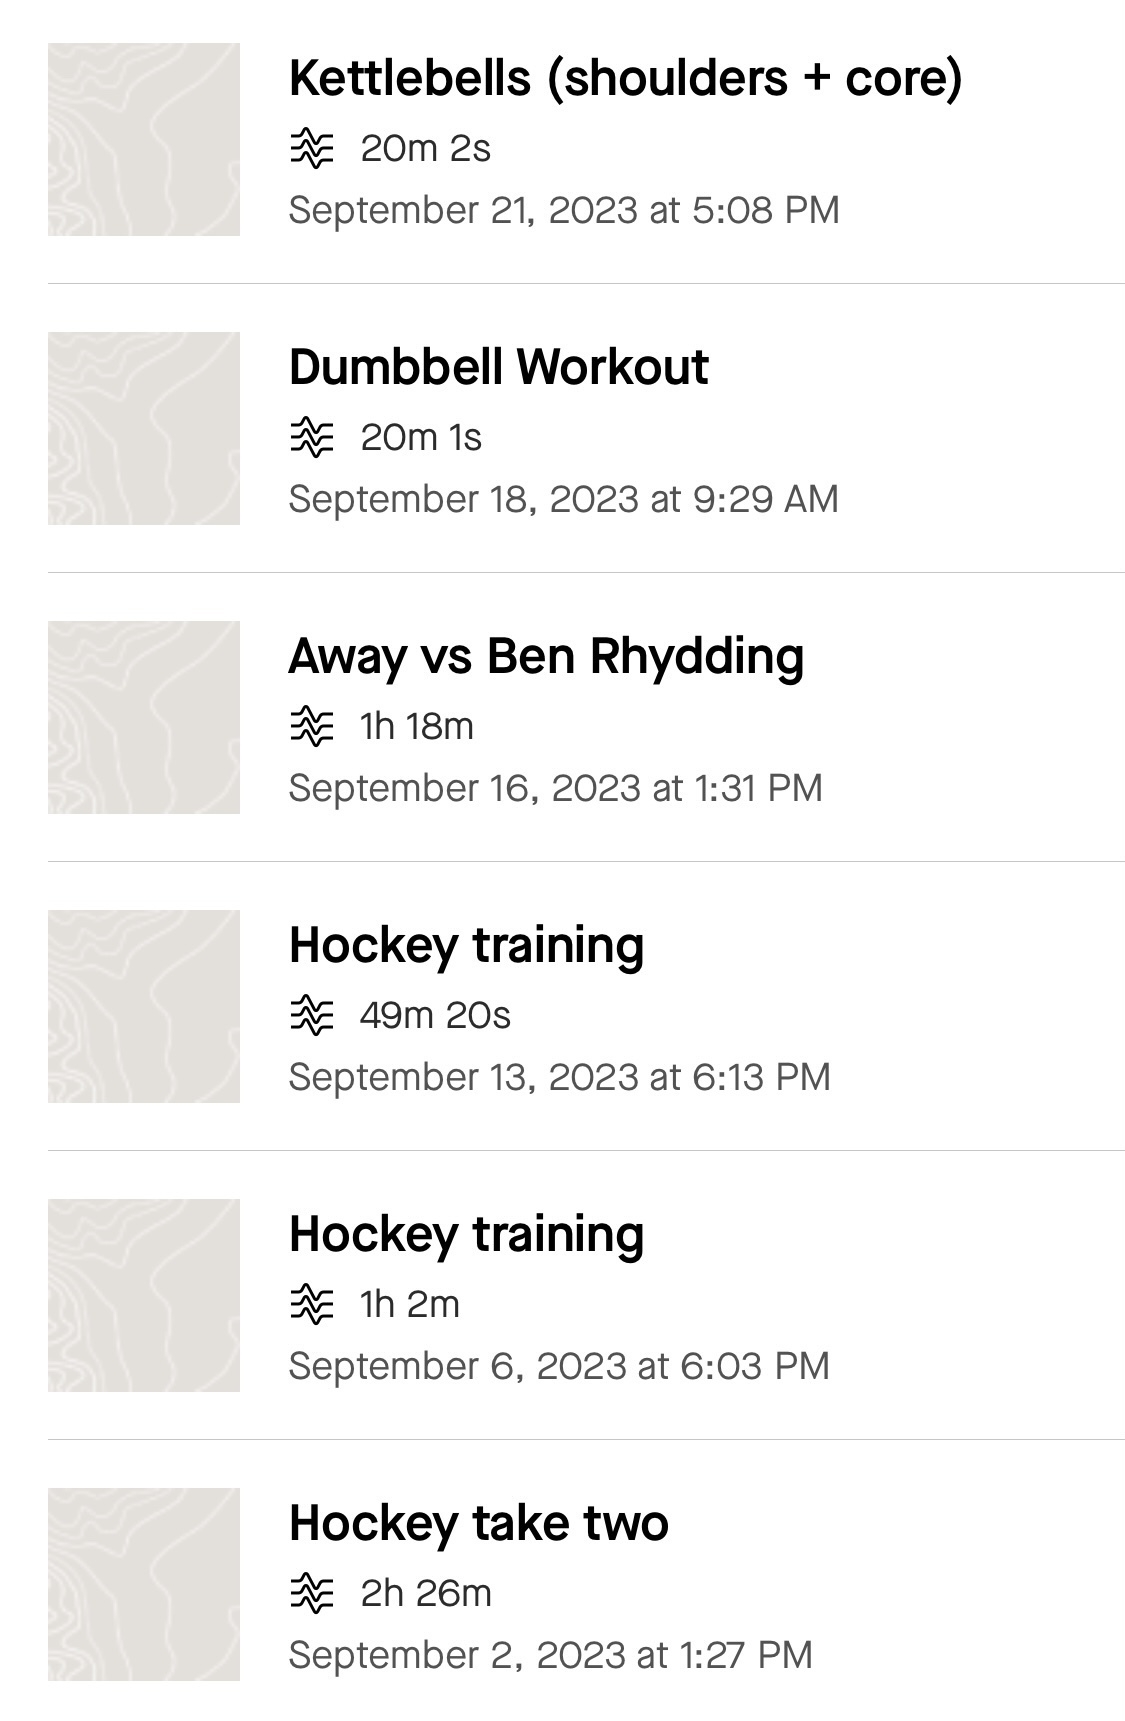 List of workouts recorded on Strava during September. Includes kettlebells, dumbbells and hockey training.